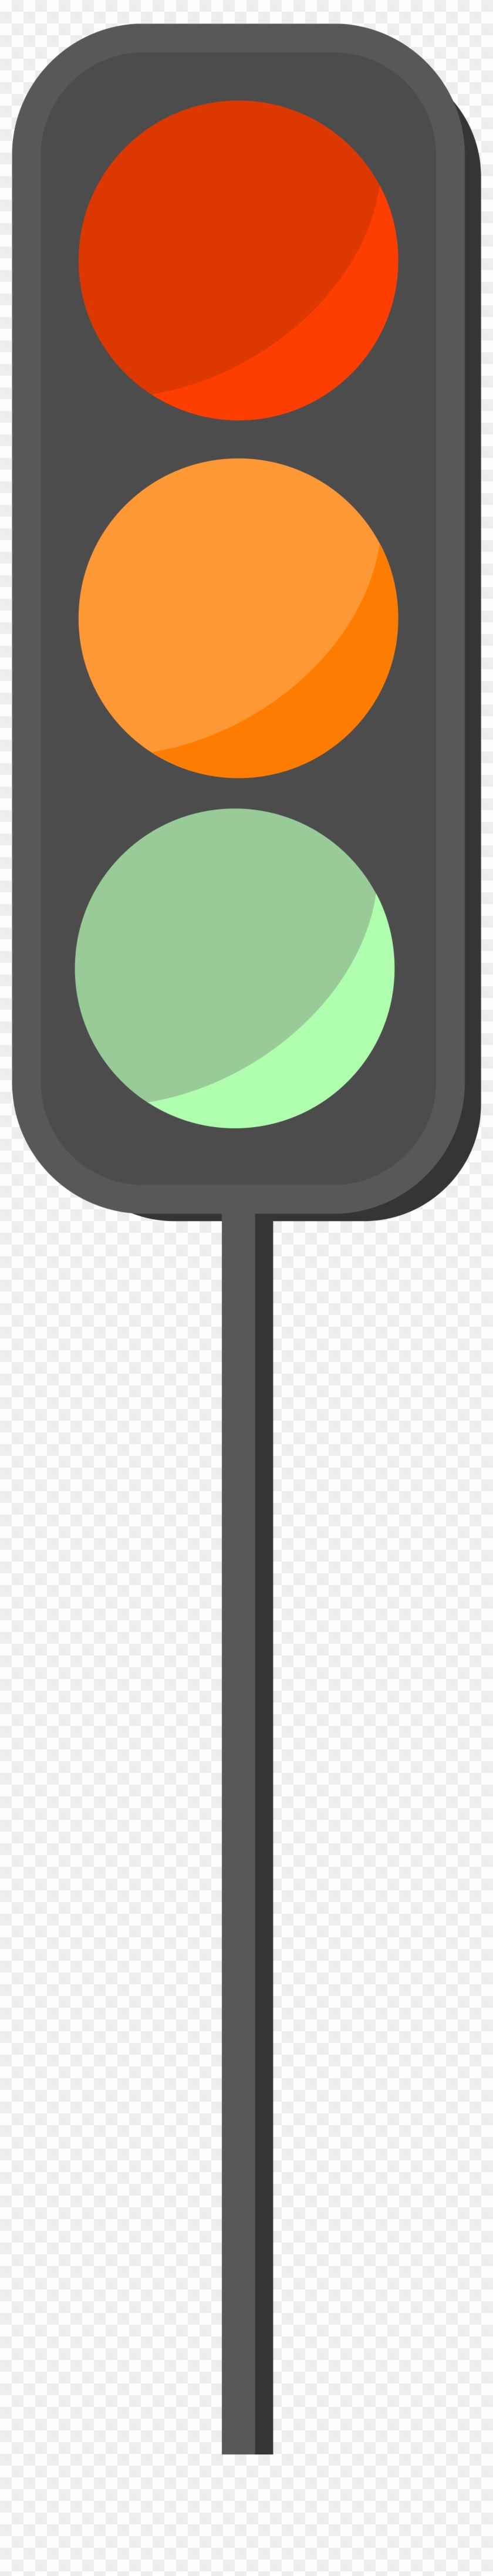 Traffic Light Png Clipart - Scalable Vector Graphics #929746